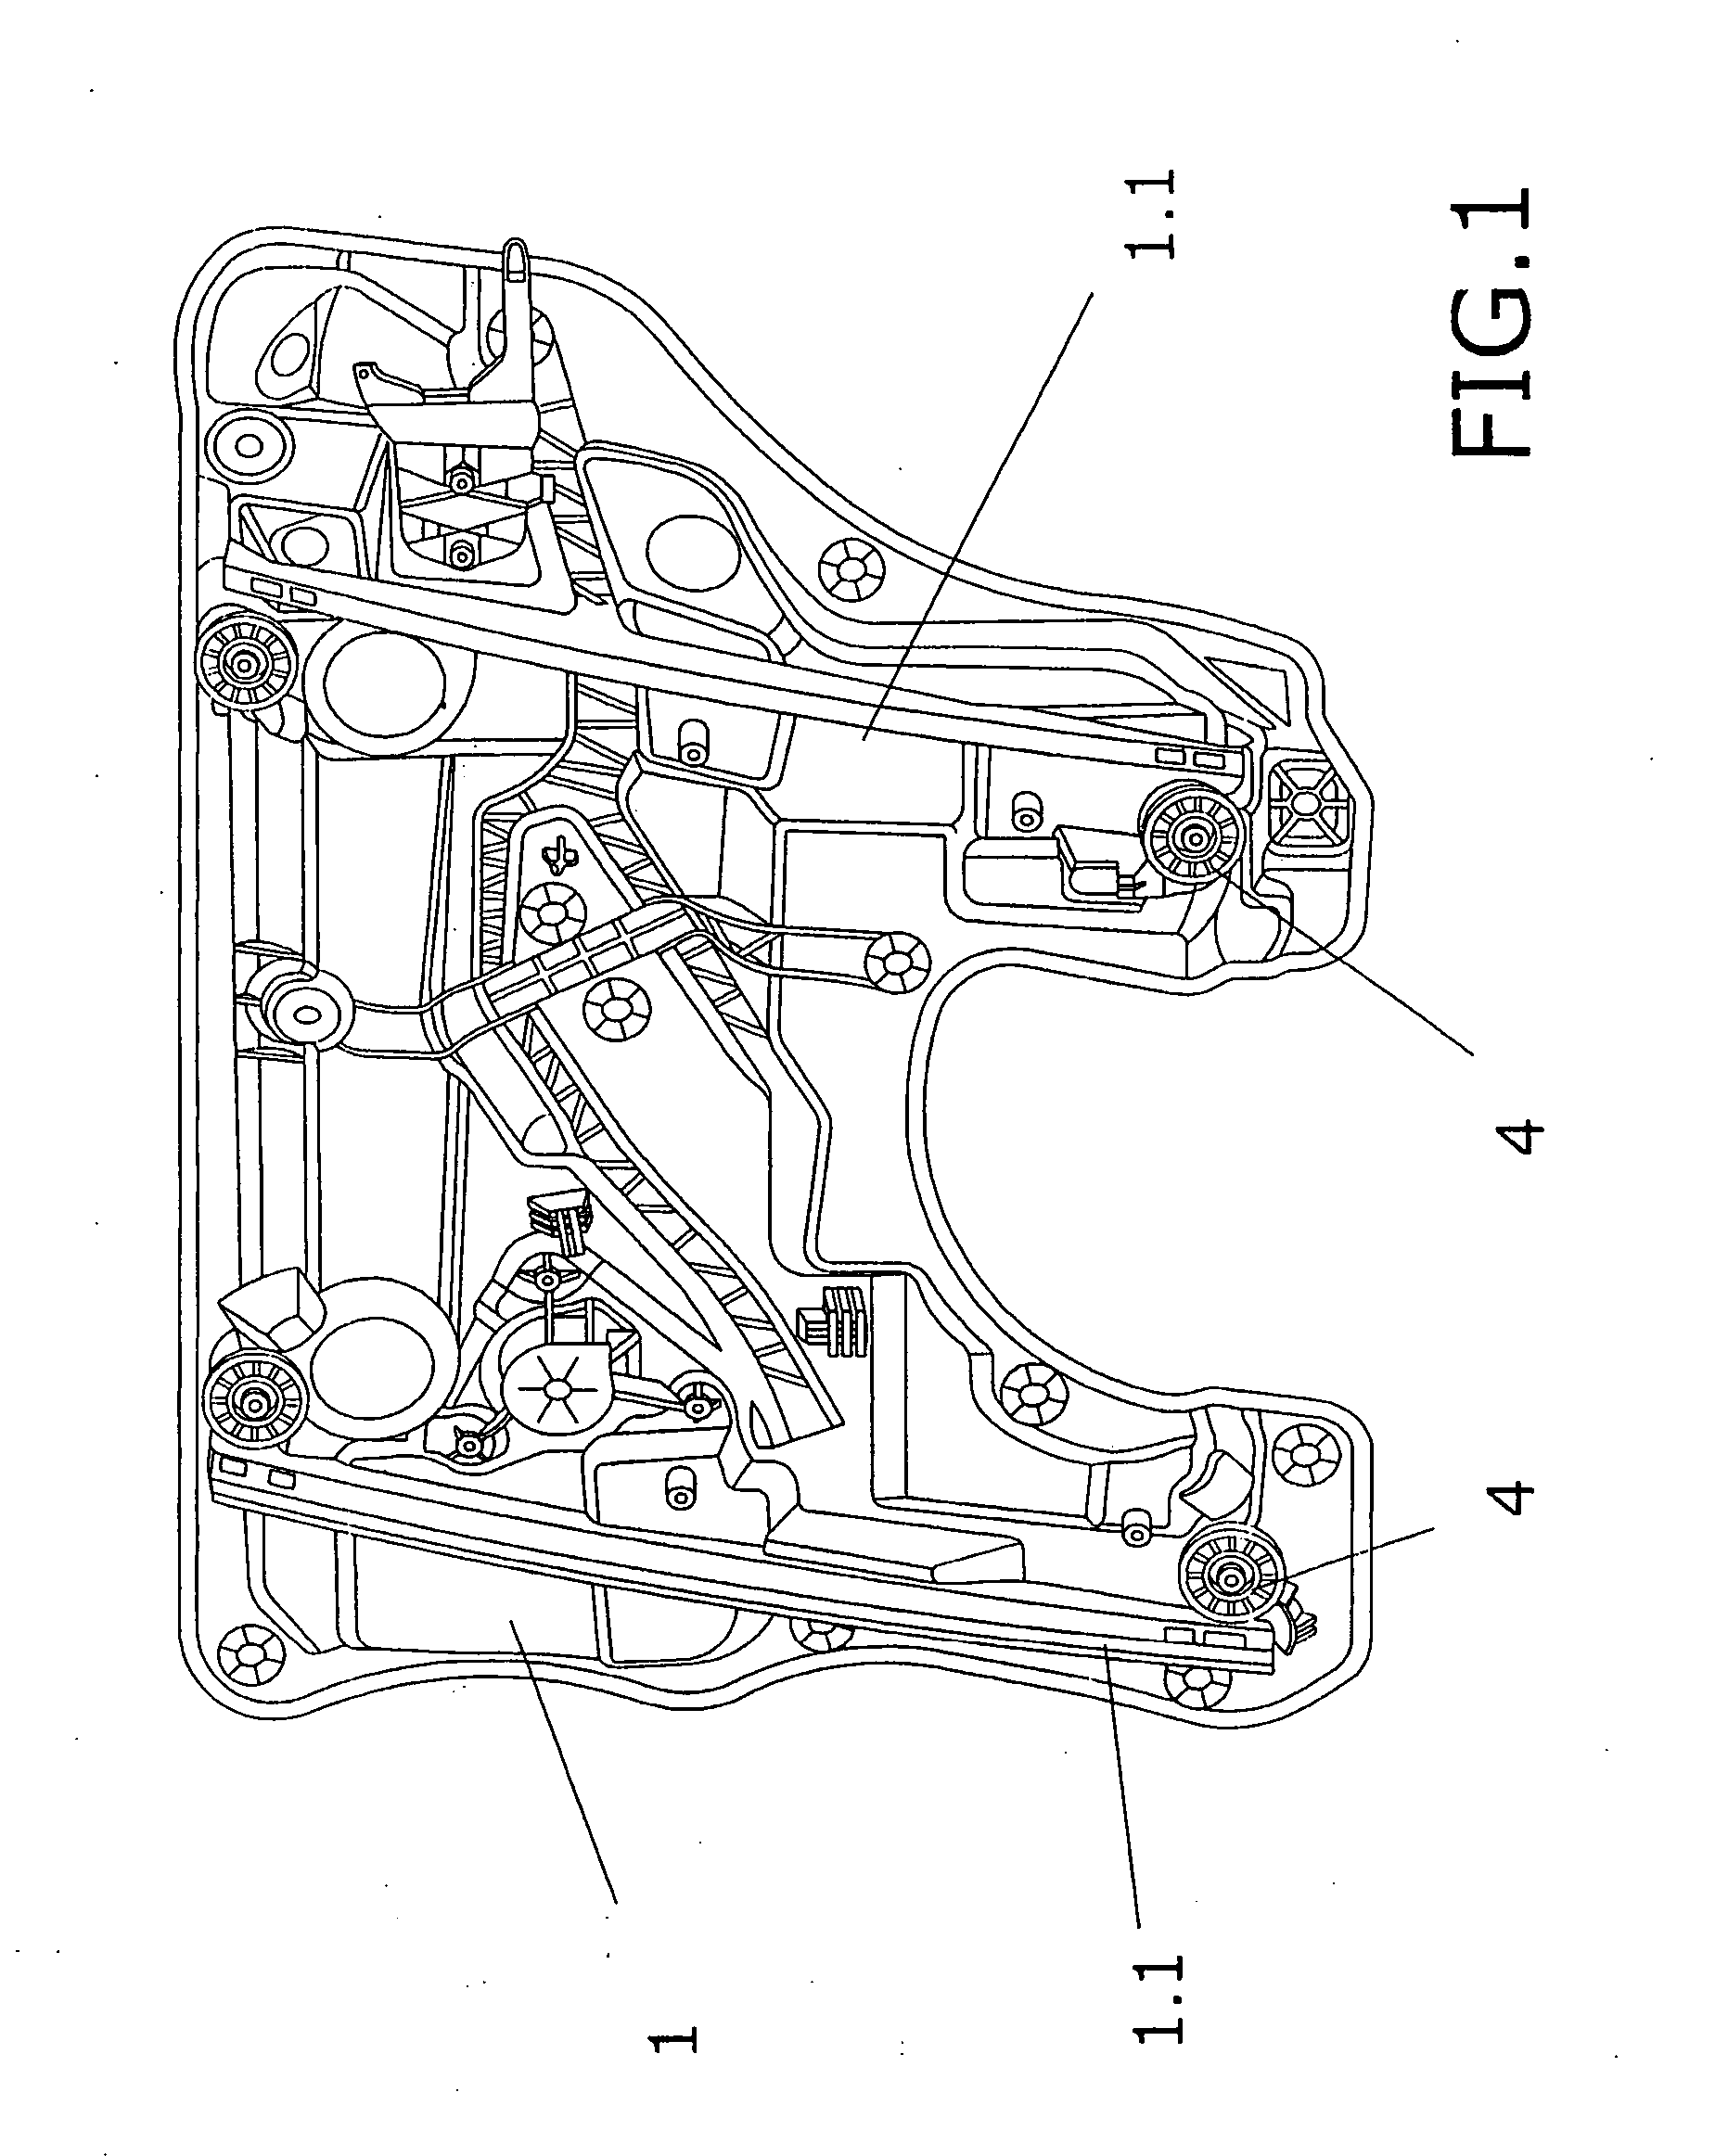 Structural supporting module for vehicle doors